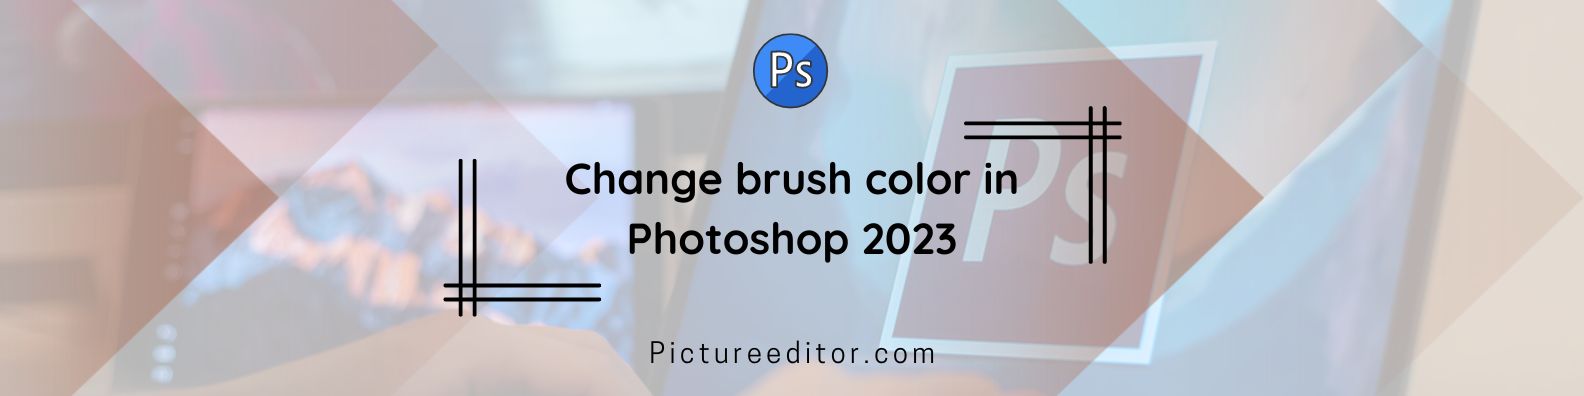 Change brush color in Photoshop 2023